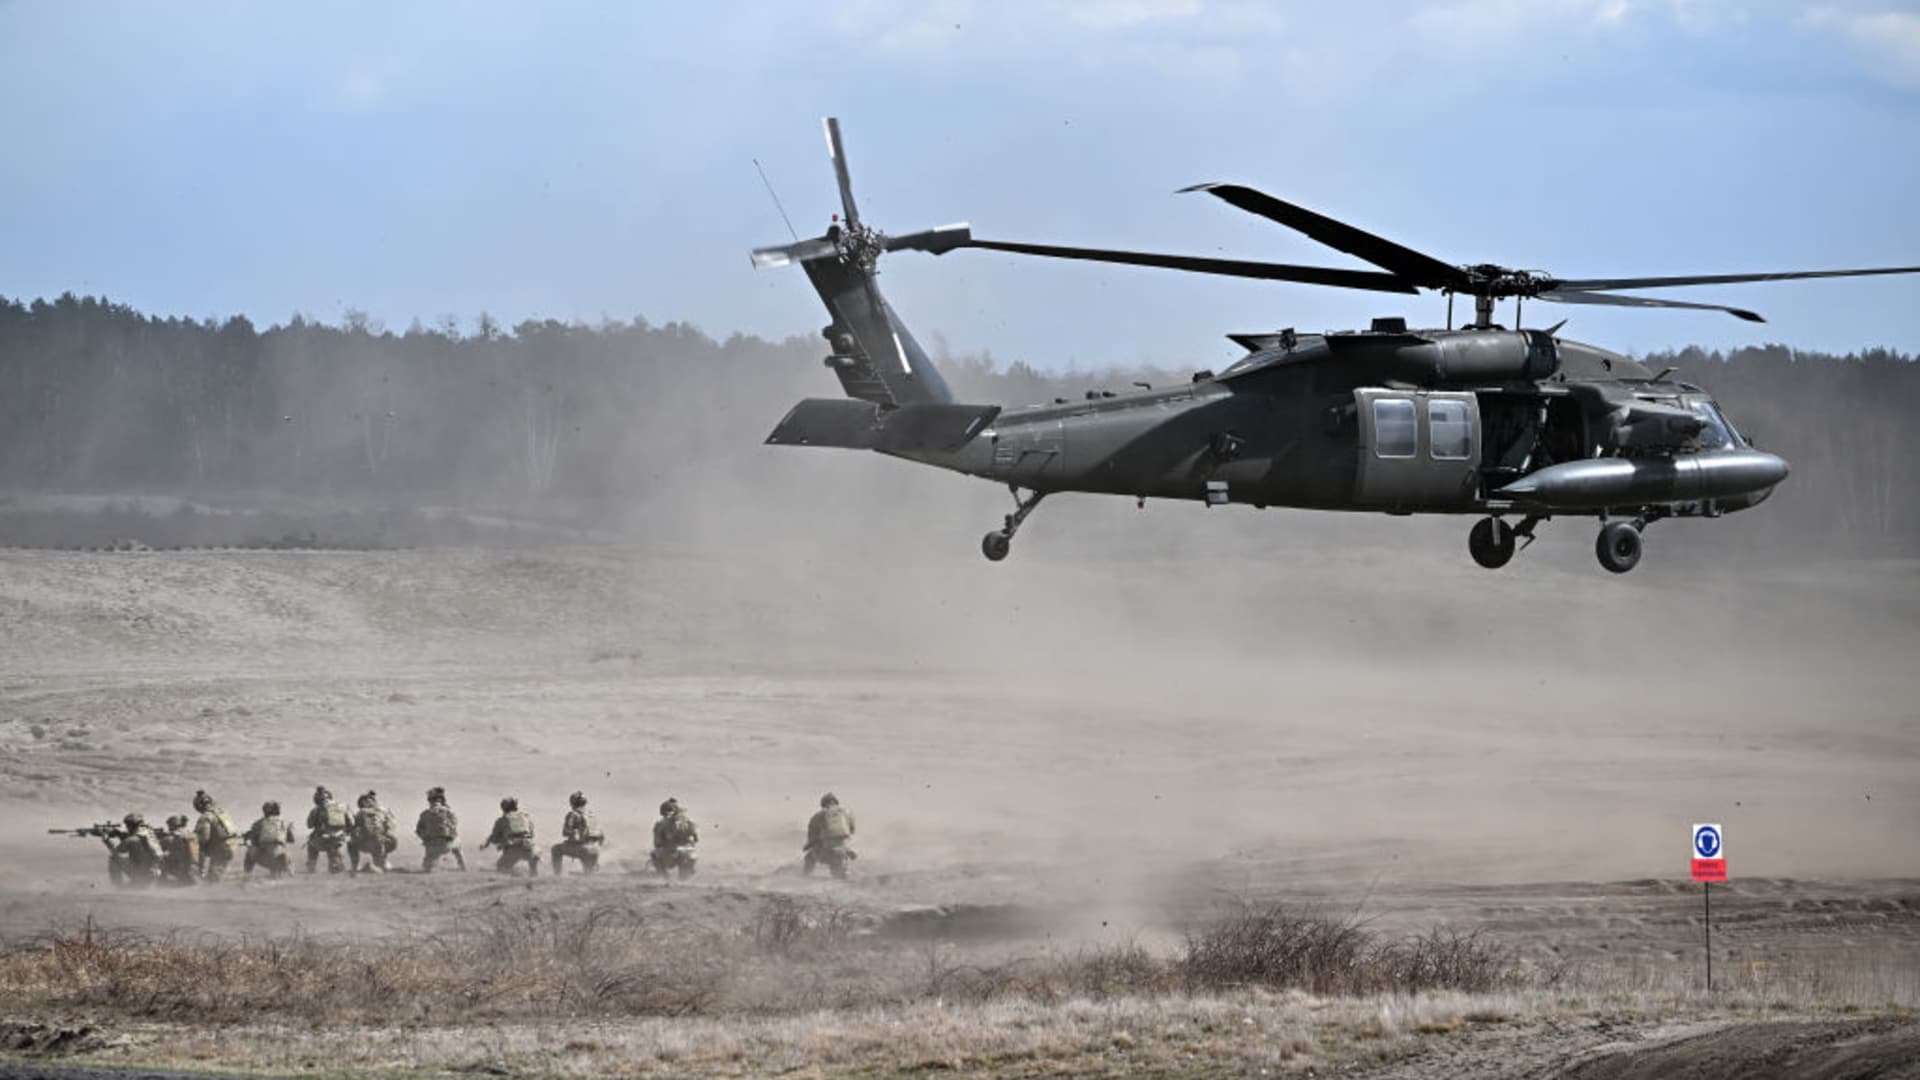 Troops from the Polish 18th Mechanised Division and the 82nd Airborne Division (USA) take part in tactical and fire training on April 8, 2022 in Nowa Deba, Poland.